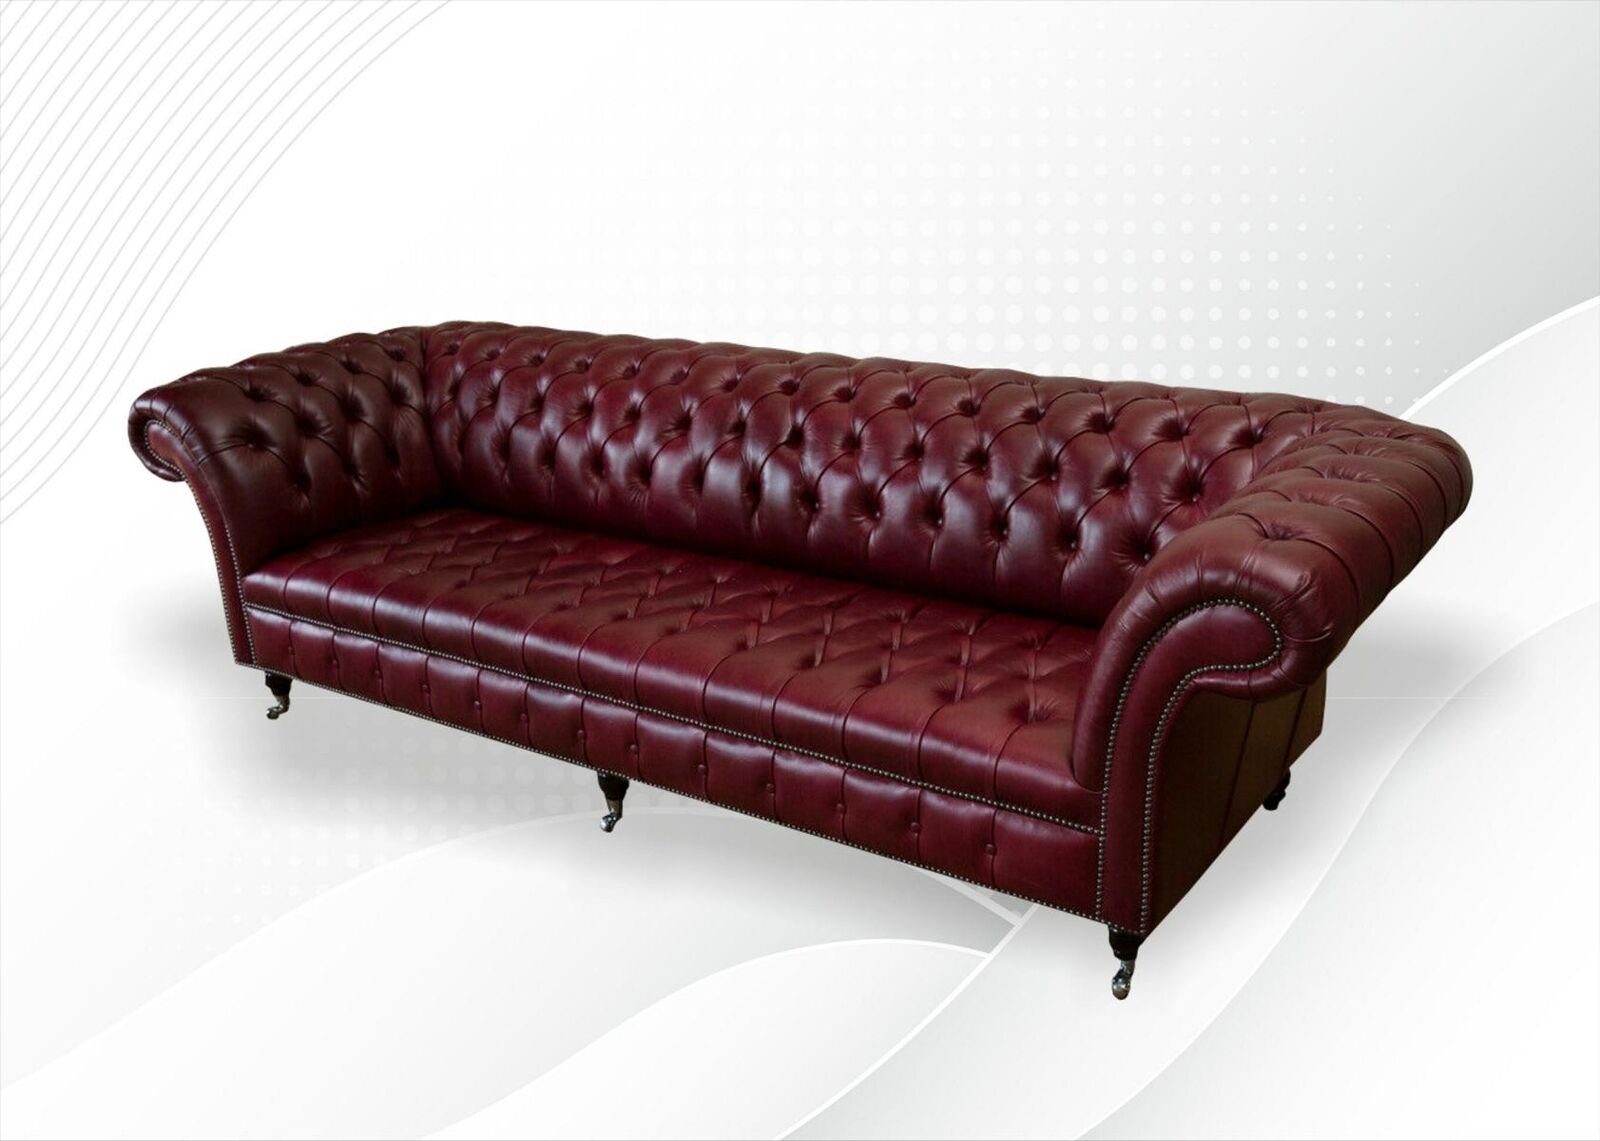 JVmoebel Made Sofa 265cm Chesterfield-Sofa Leder Teile, in Chesterfield Big 1 Sofa Sofort, 100% Europa Couch Bordeaux